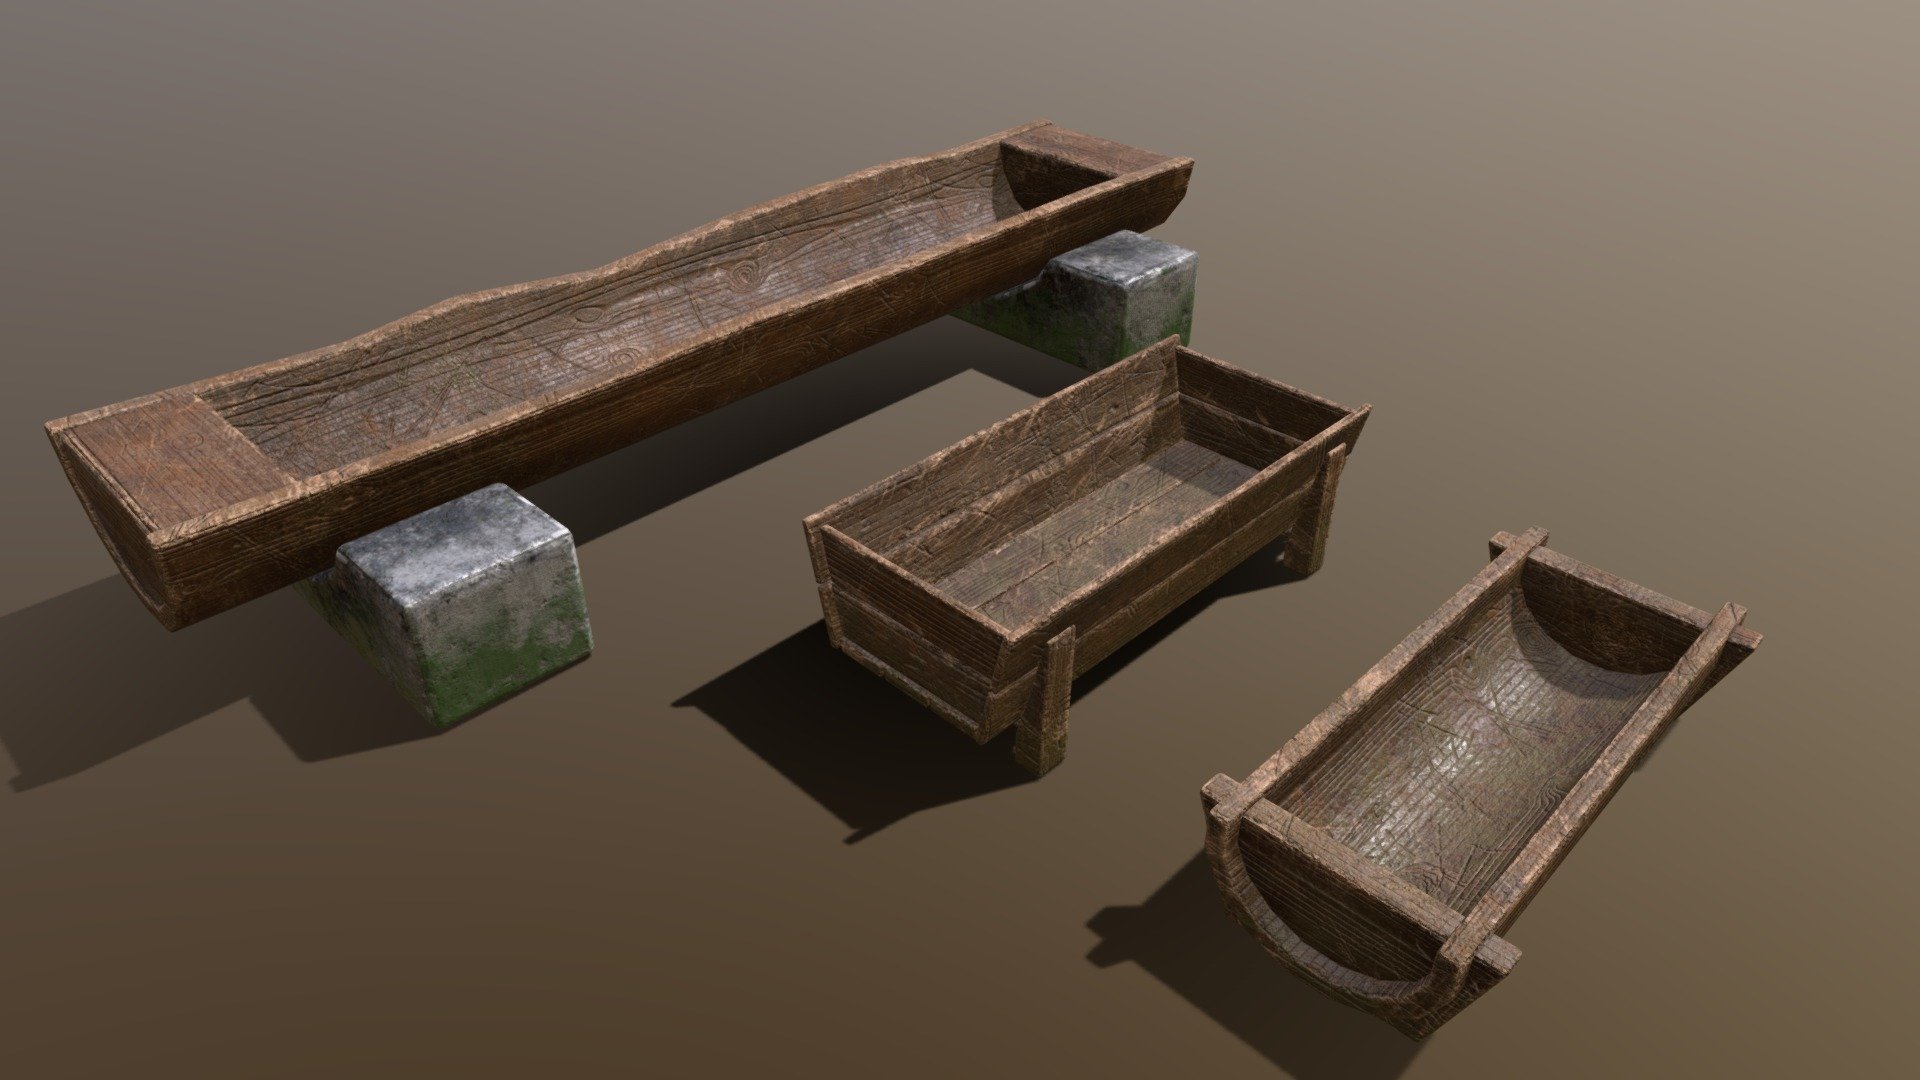 Medieval Trough Set 3D Model. This model contains the Medieval Trough Set itself 

All modeled in Maya, textured with Substance Painter.

The model was built to scale and is UV unwrapped properly. Contains only one 4K texture set.  

⦁   4732 tris. 

⦁   Contains: .FBX .OBJ and .DAE

⦁   Model has clean topology. No Ngons.

⦁   Built to scale

⦁   Unwrapped UV Map

⦁   4K Texture set

⦁   High quality details

⦁   Based on real life references

⦁   Renders done in Marmoset Toolbag

Polycount: 

Verts 2440

Edges 4786

Faces 2394

Tris 4732

If you have any questions please feel free to ask me 3d model